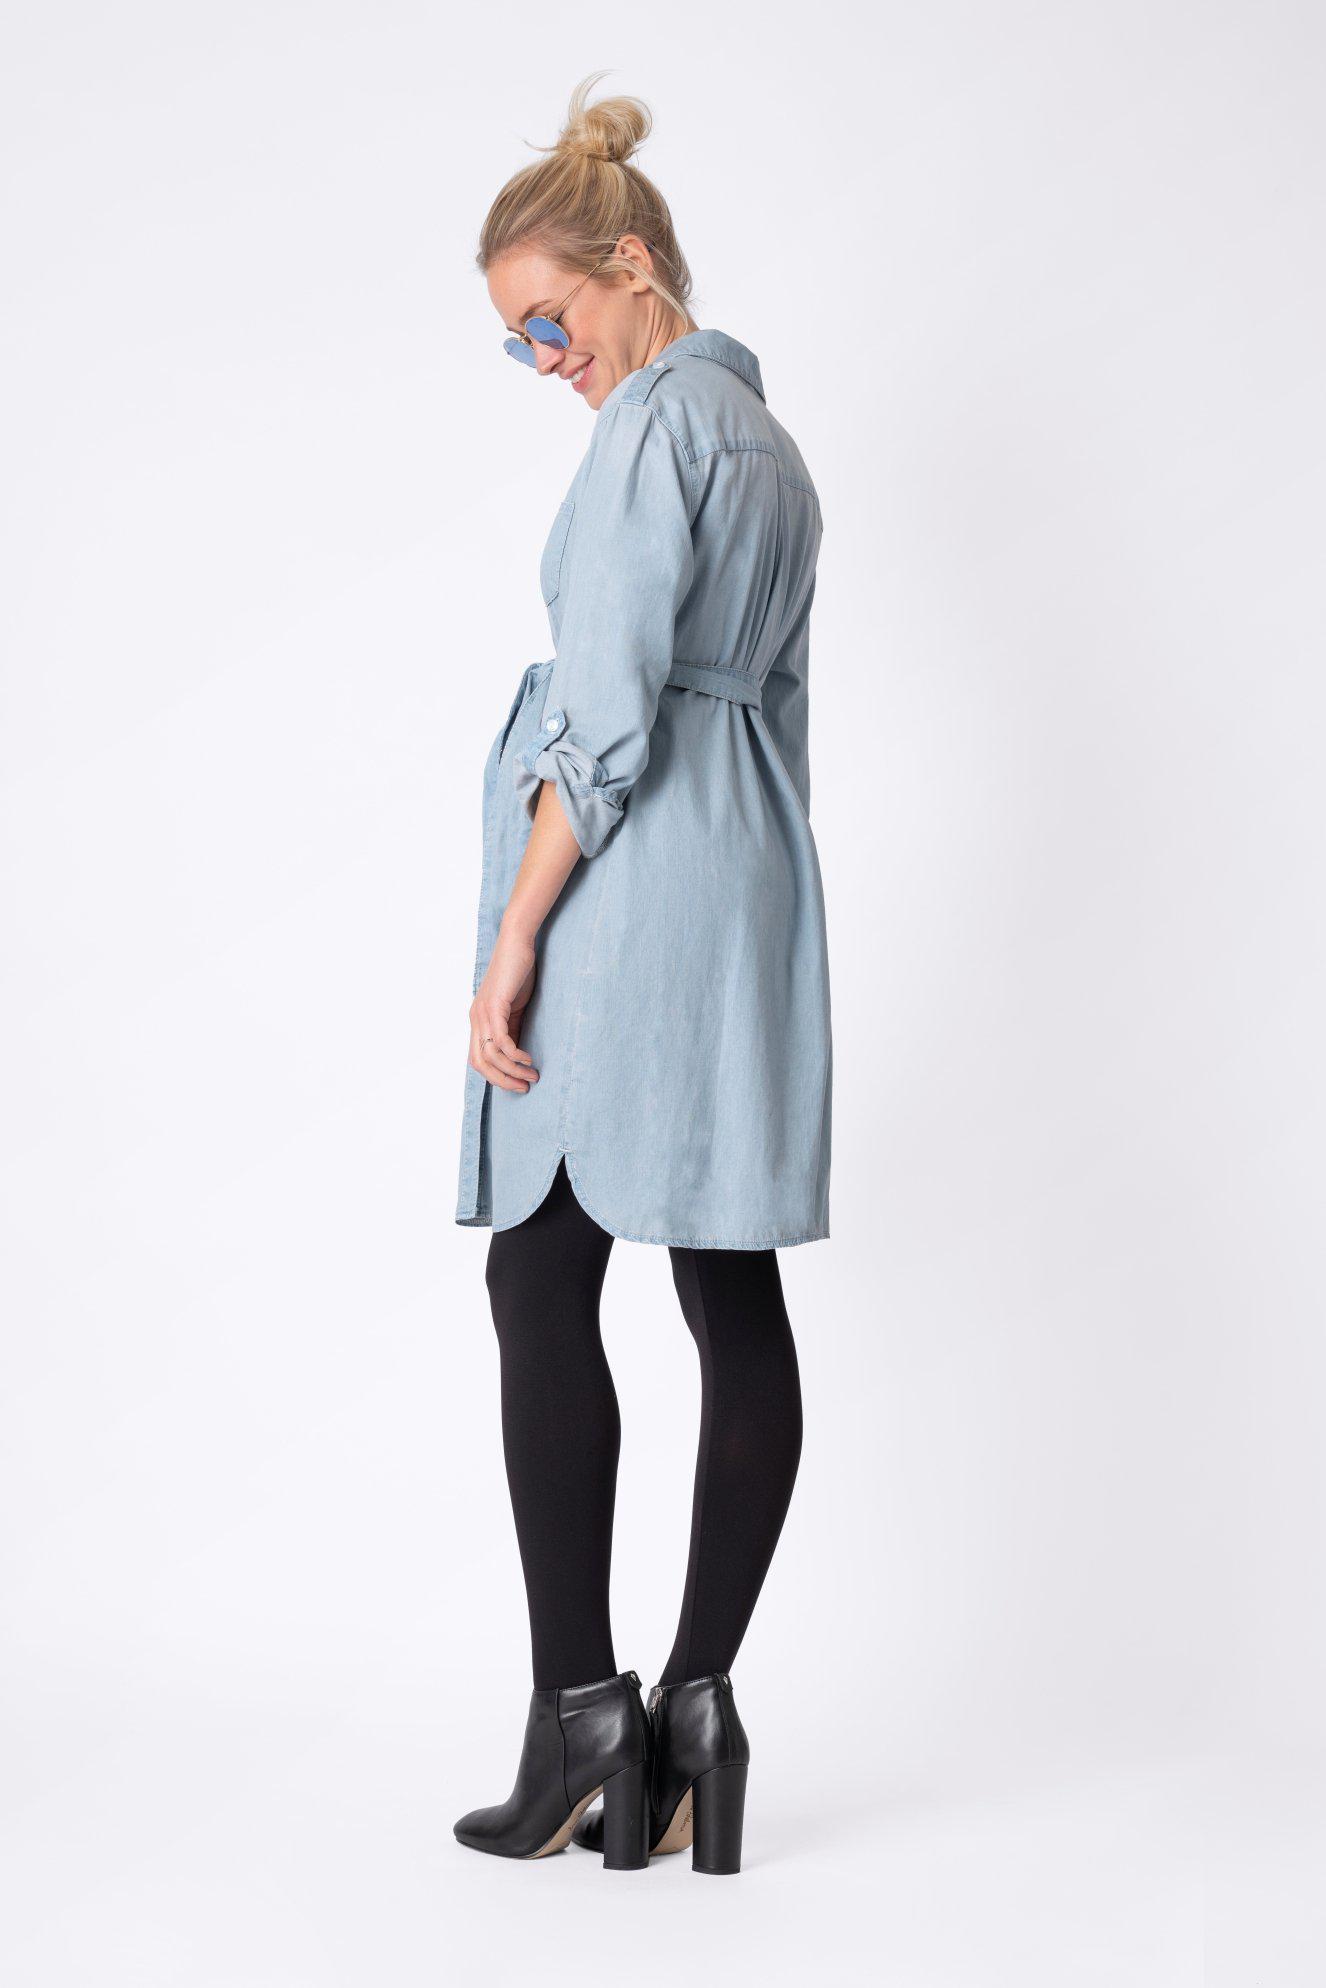 Justine denim dress-Dress-Seraphine-Expectations Copenhagen - pregnant fashion - expecting in style